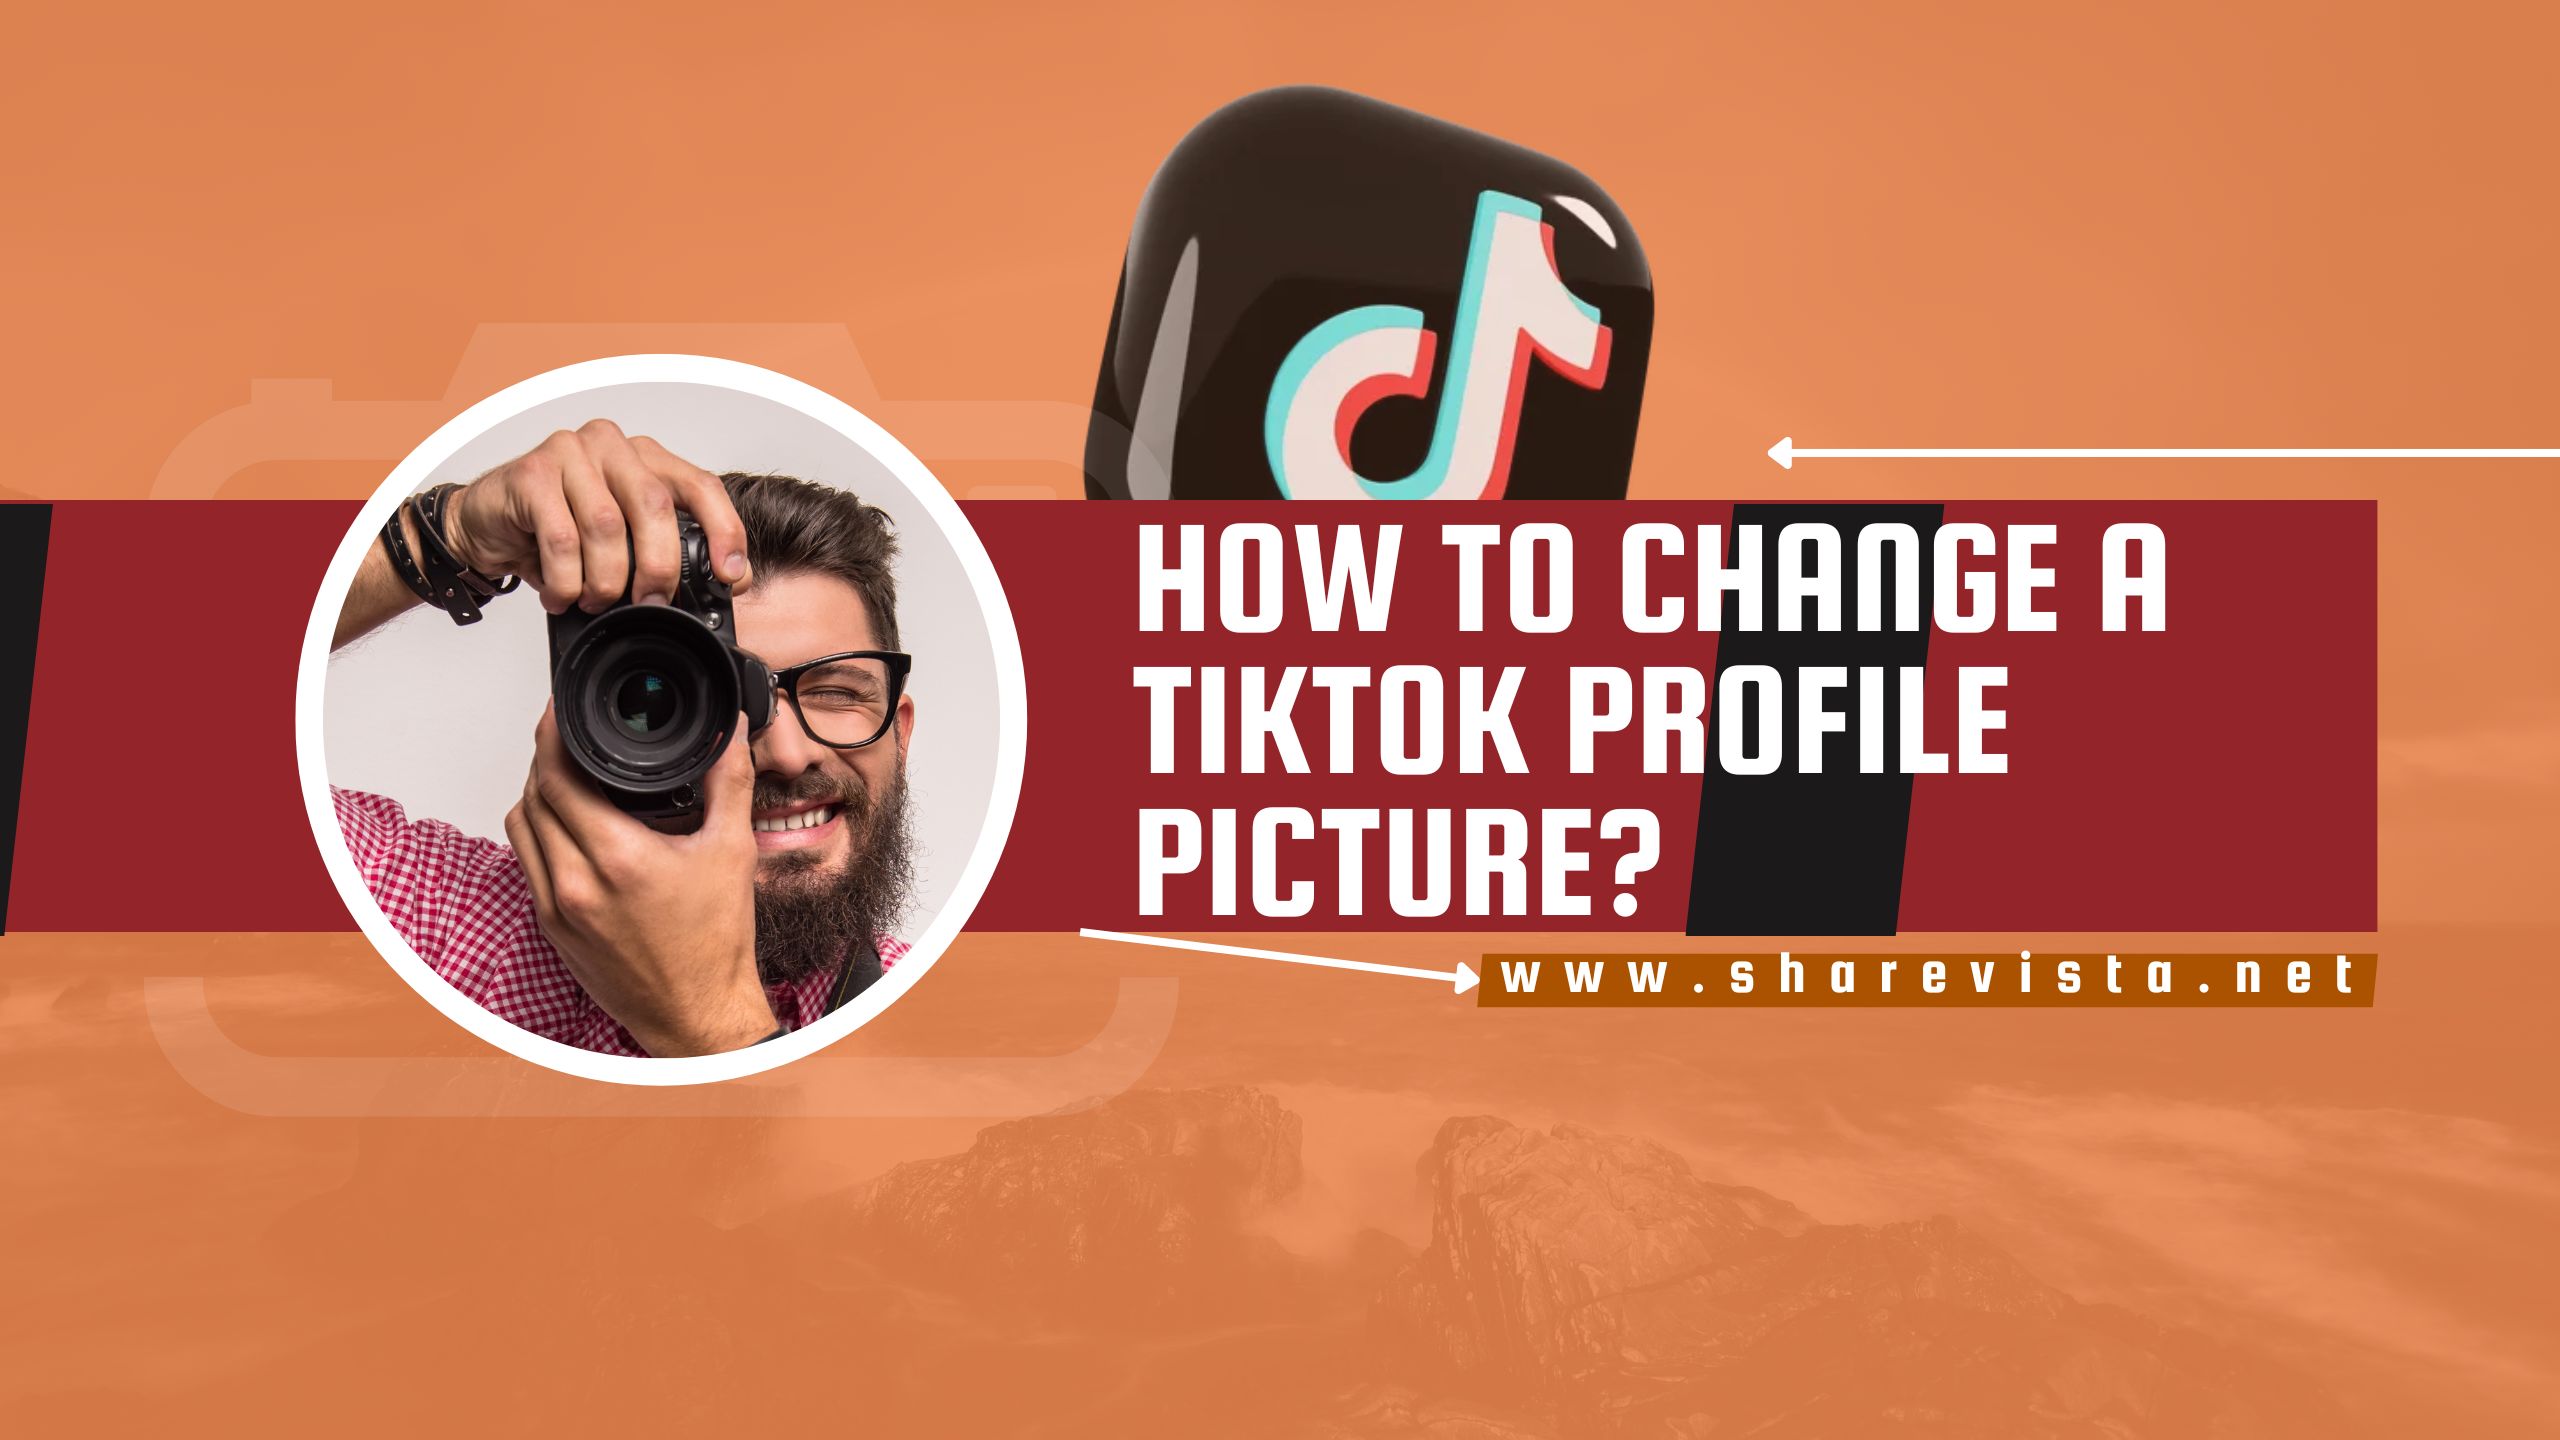 How to change a TikTok profile picture